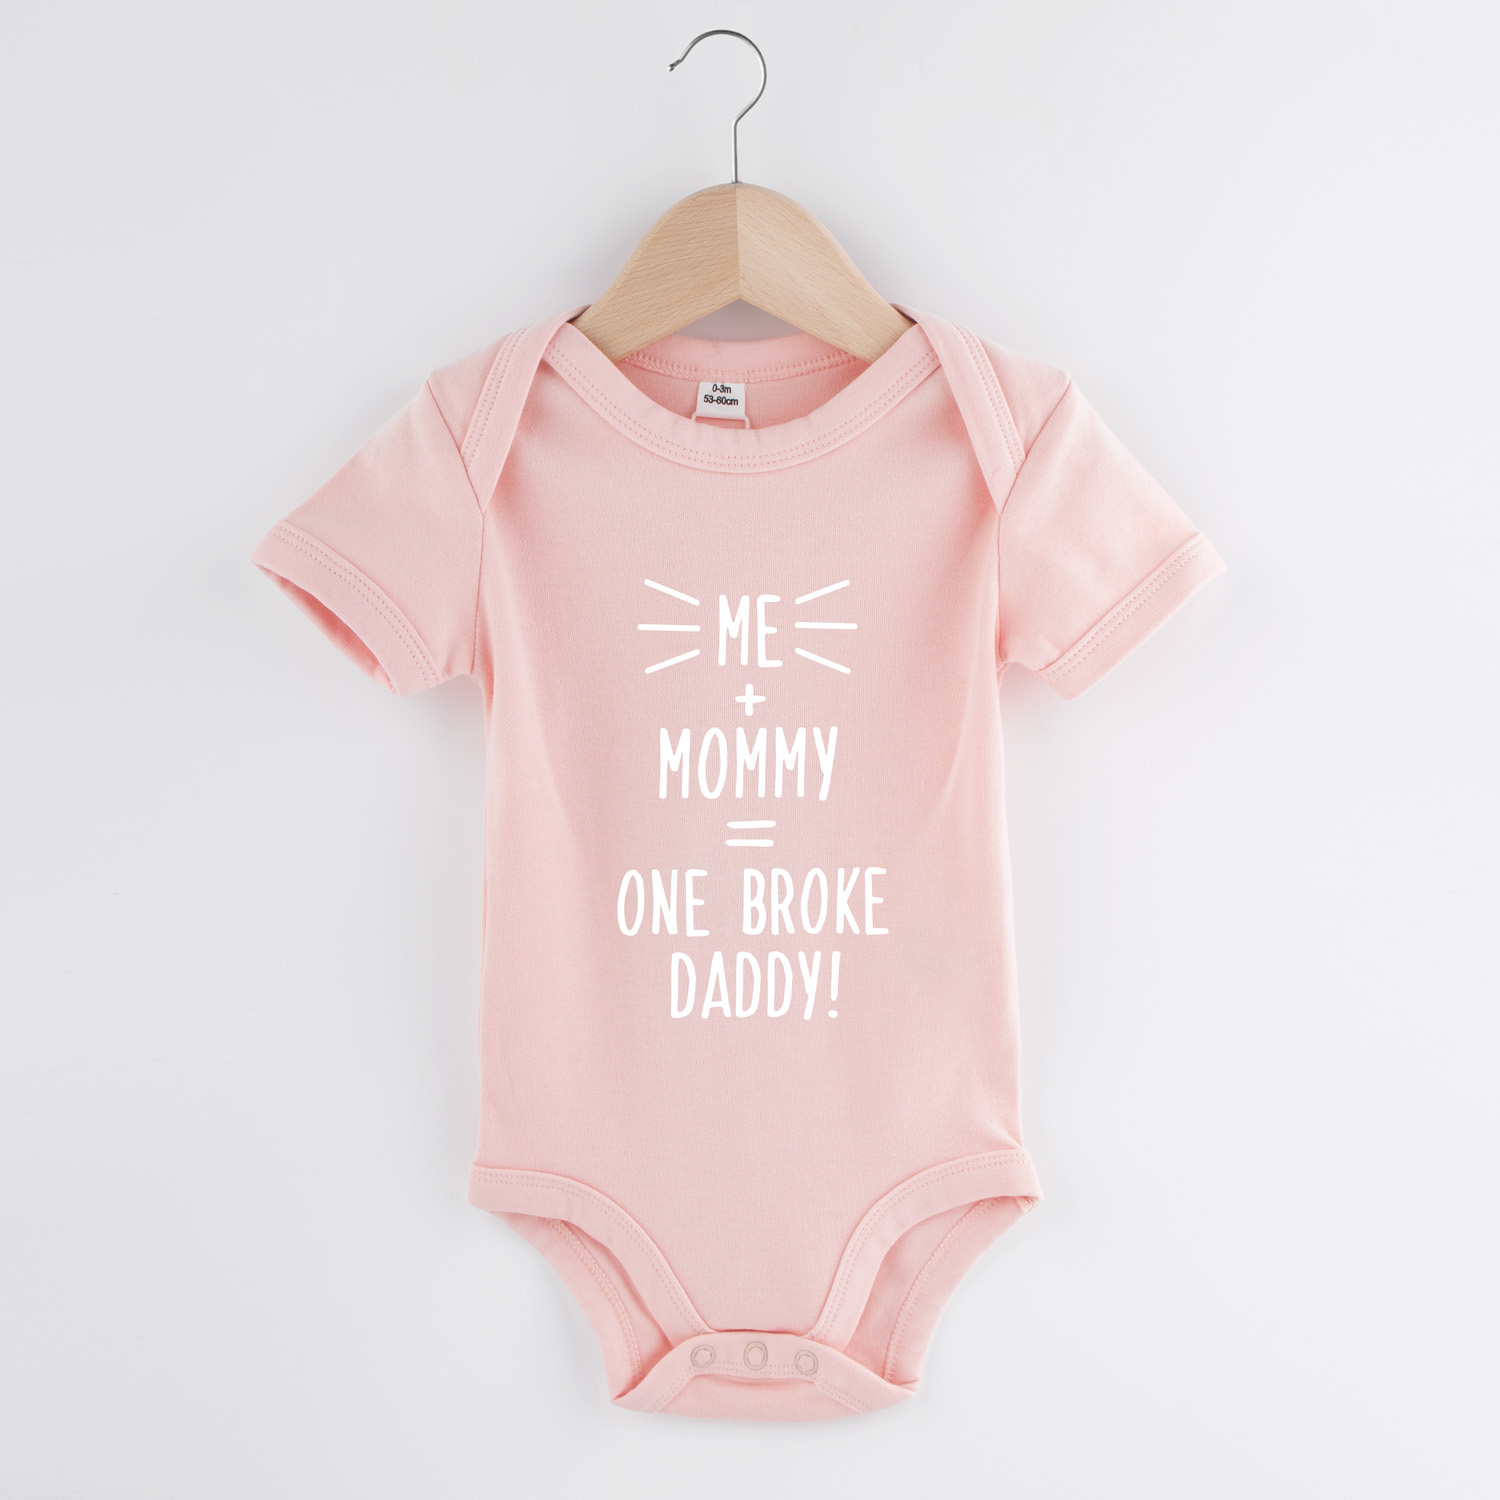 Me + mom = one broke daddy | Baby romper | my fabulous life.